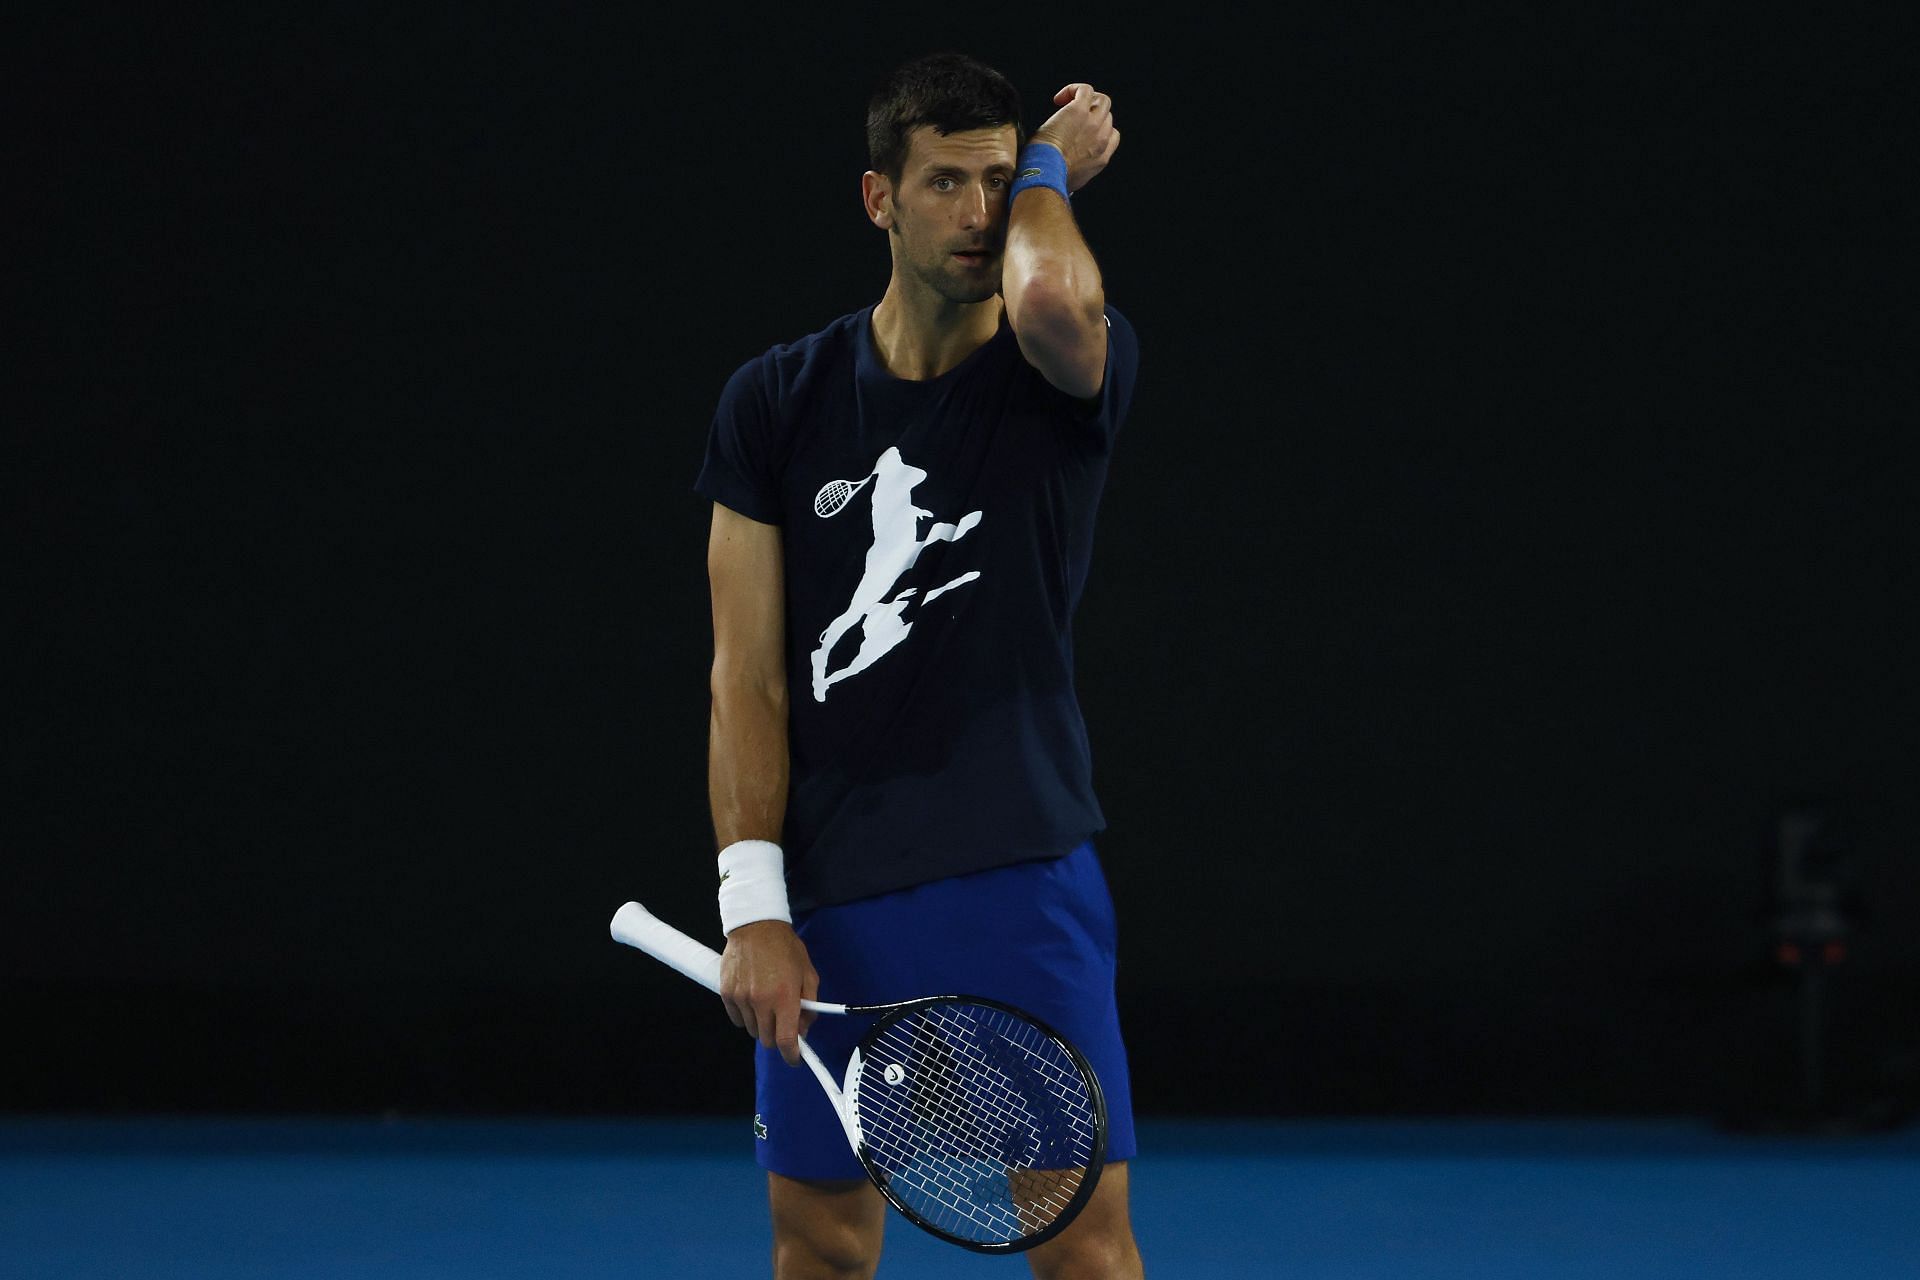 Novak Djokovic was deeply disappointed by how things ended for him in Australia